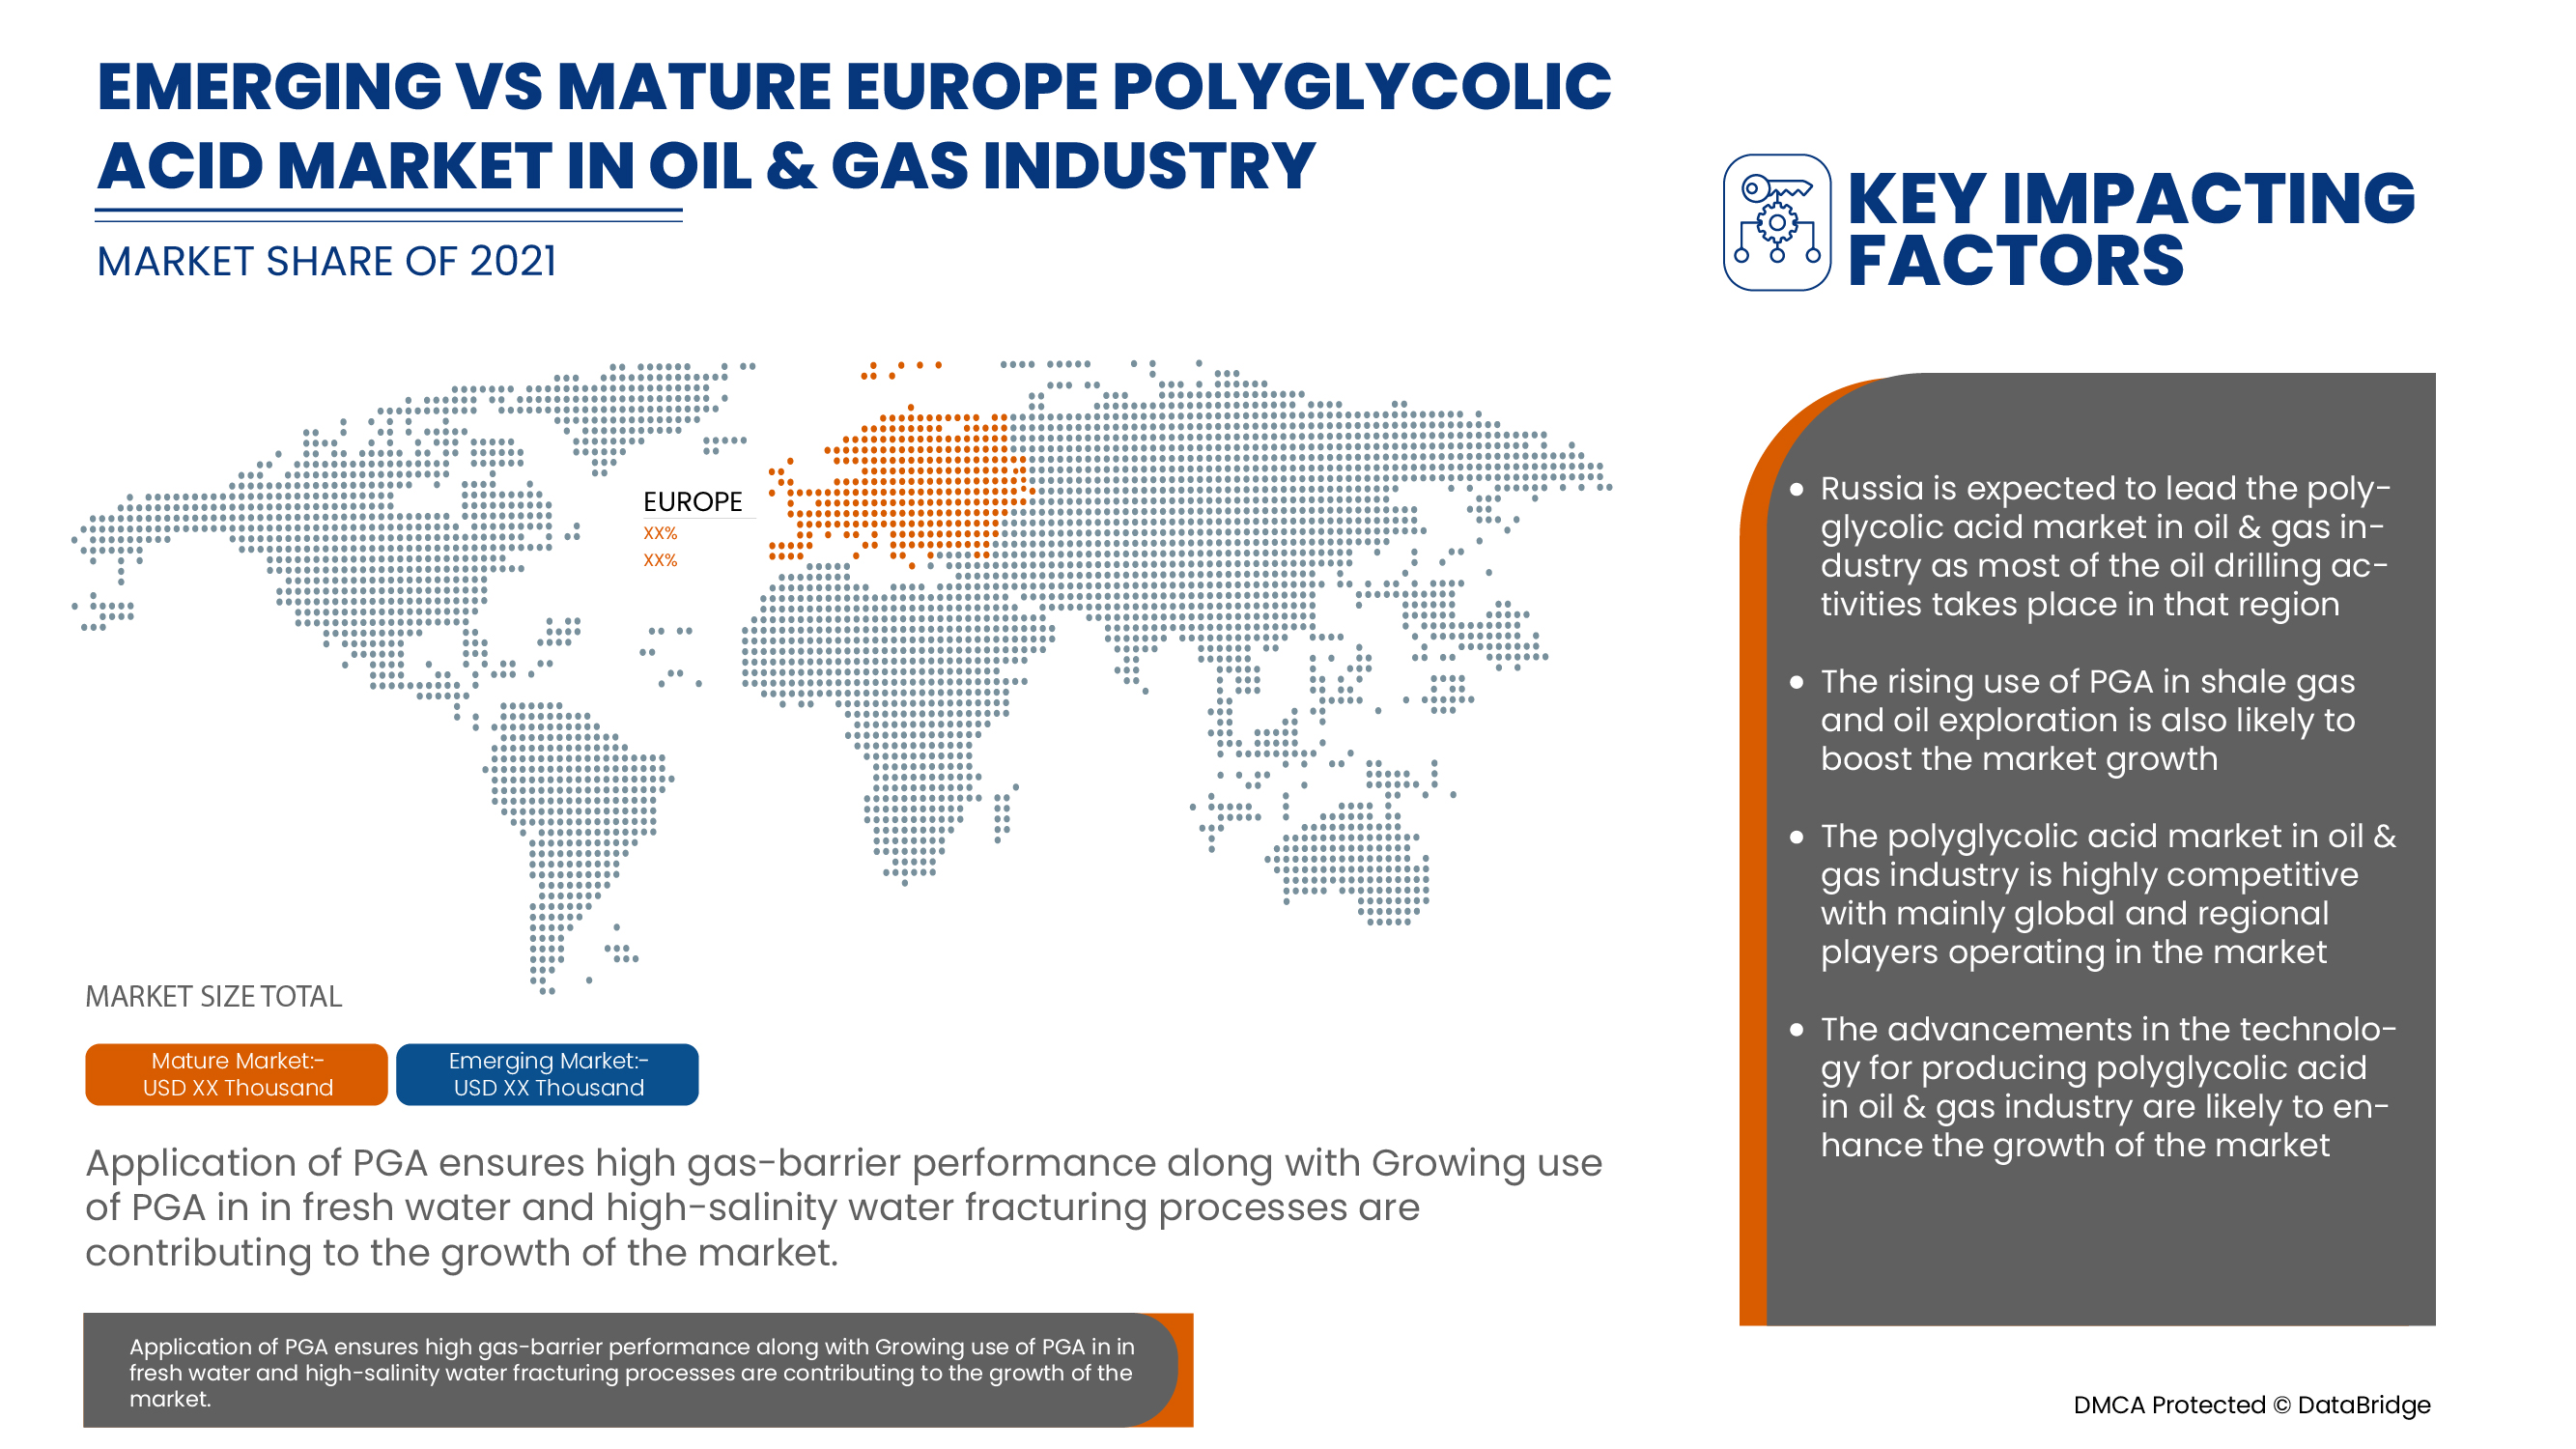 Europe Polyglycolic Acid Market in Oil and Gas industry